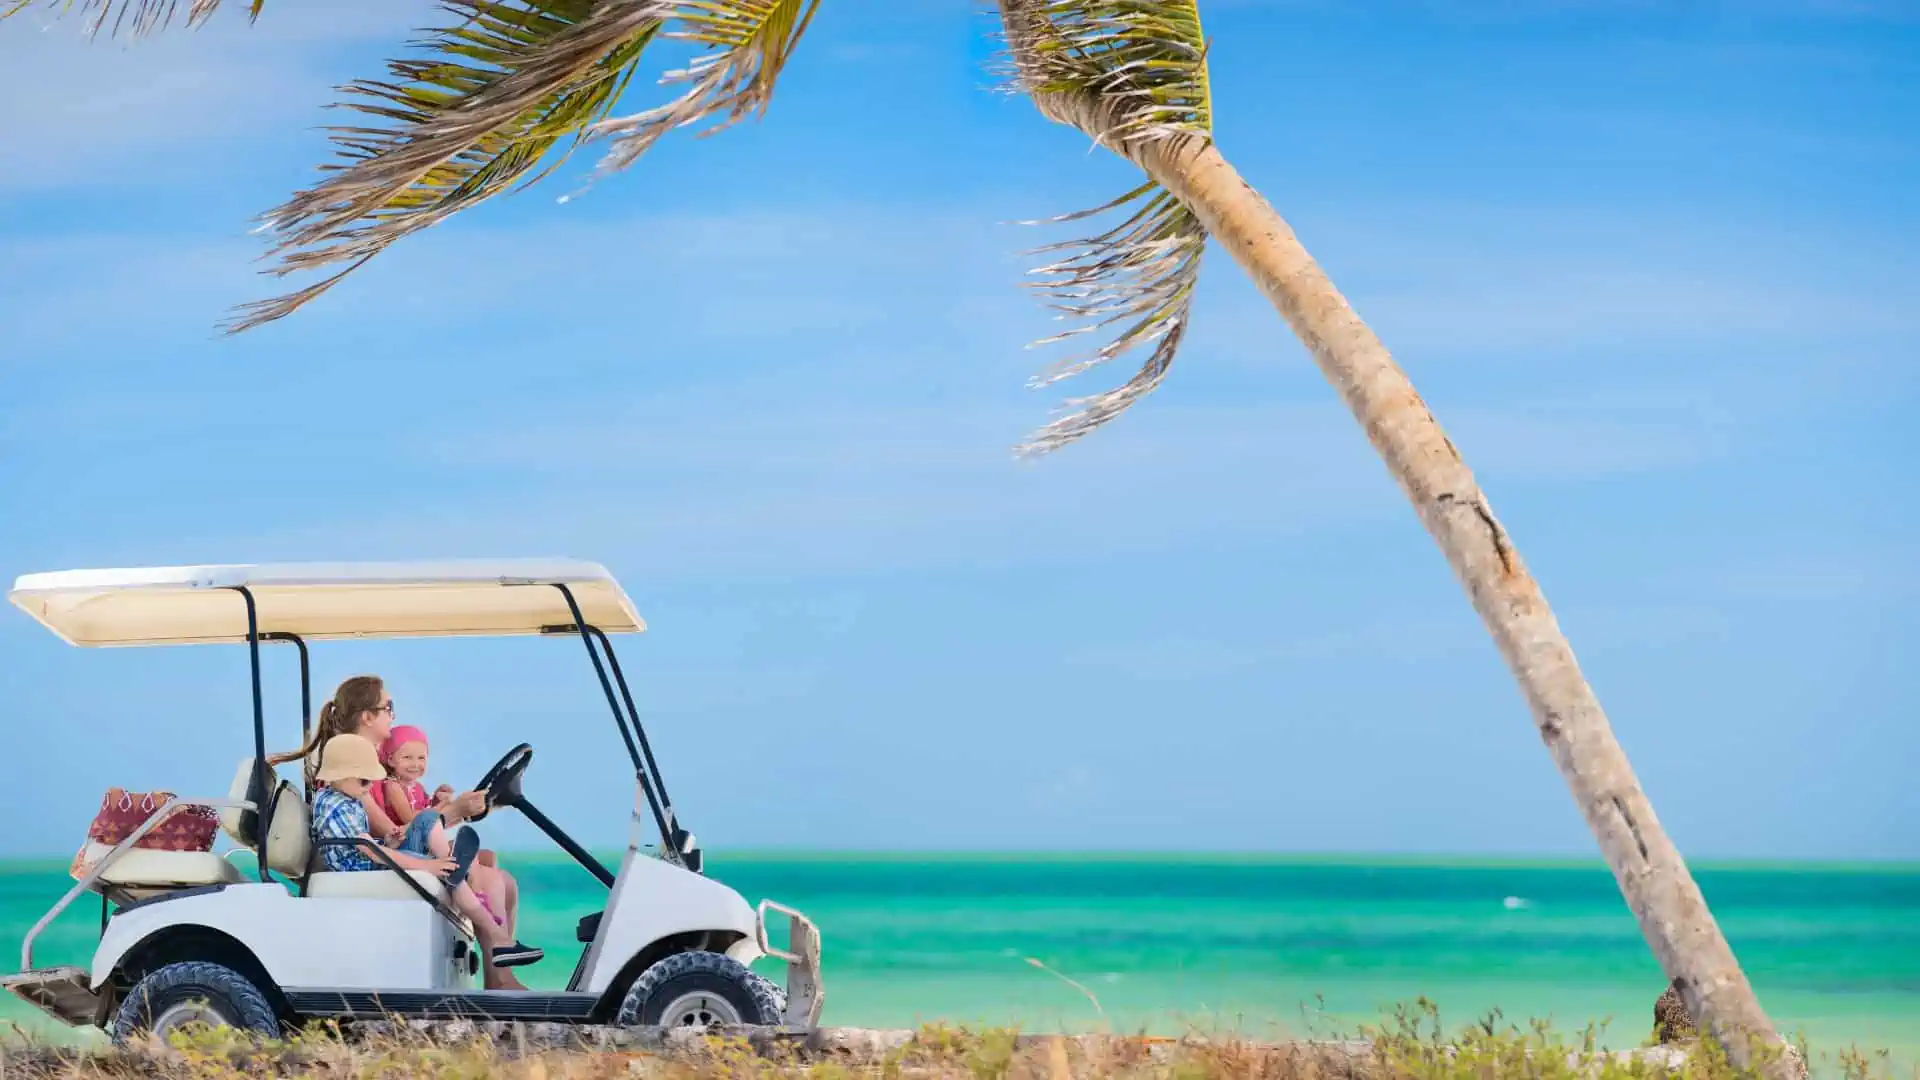 Best Golf Cart Fans - showing golf cart and family on a hot beach with palm trees